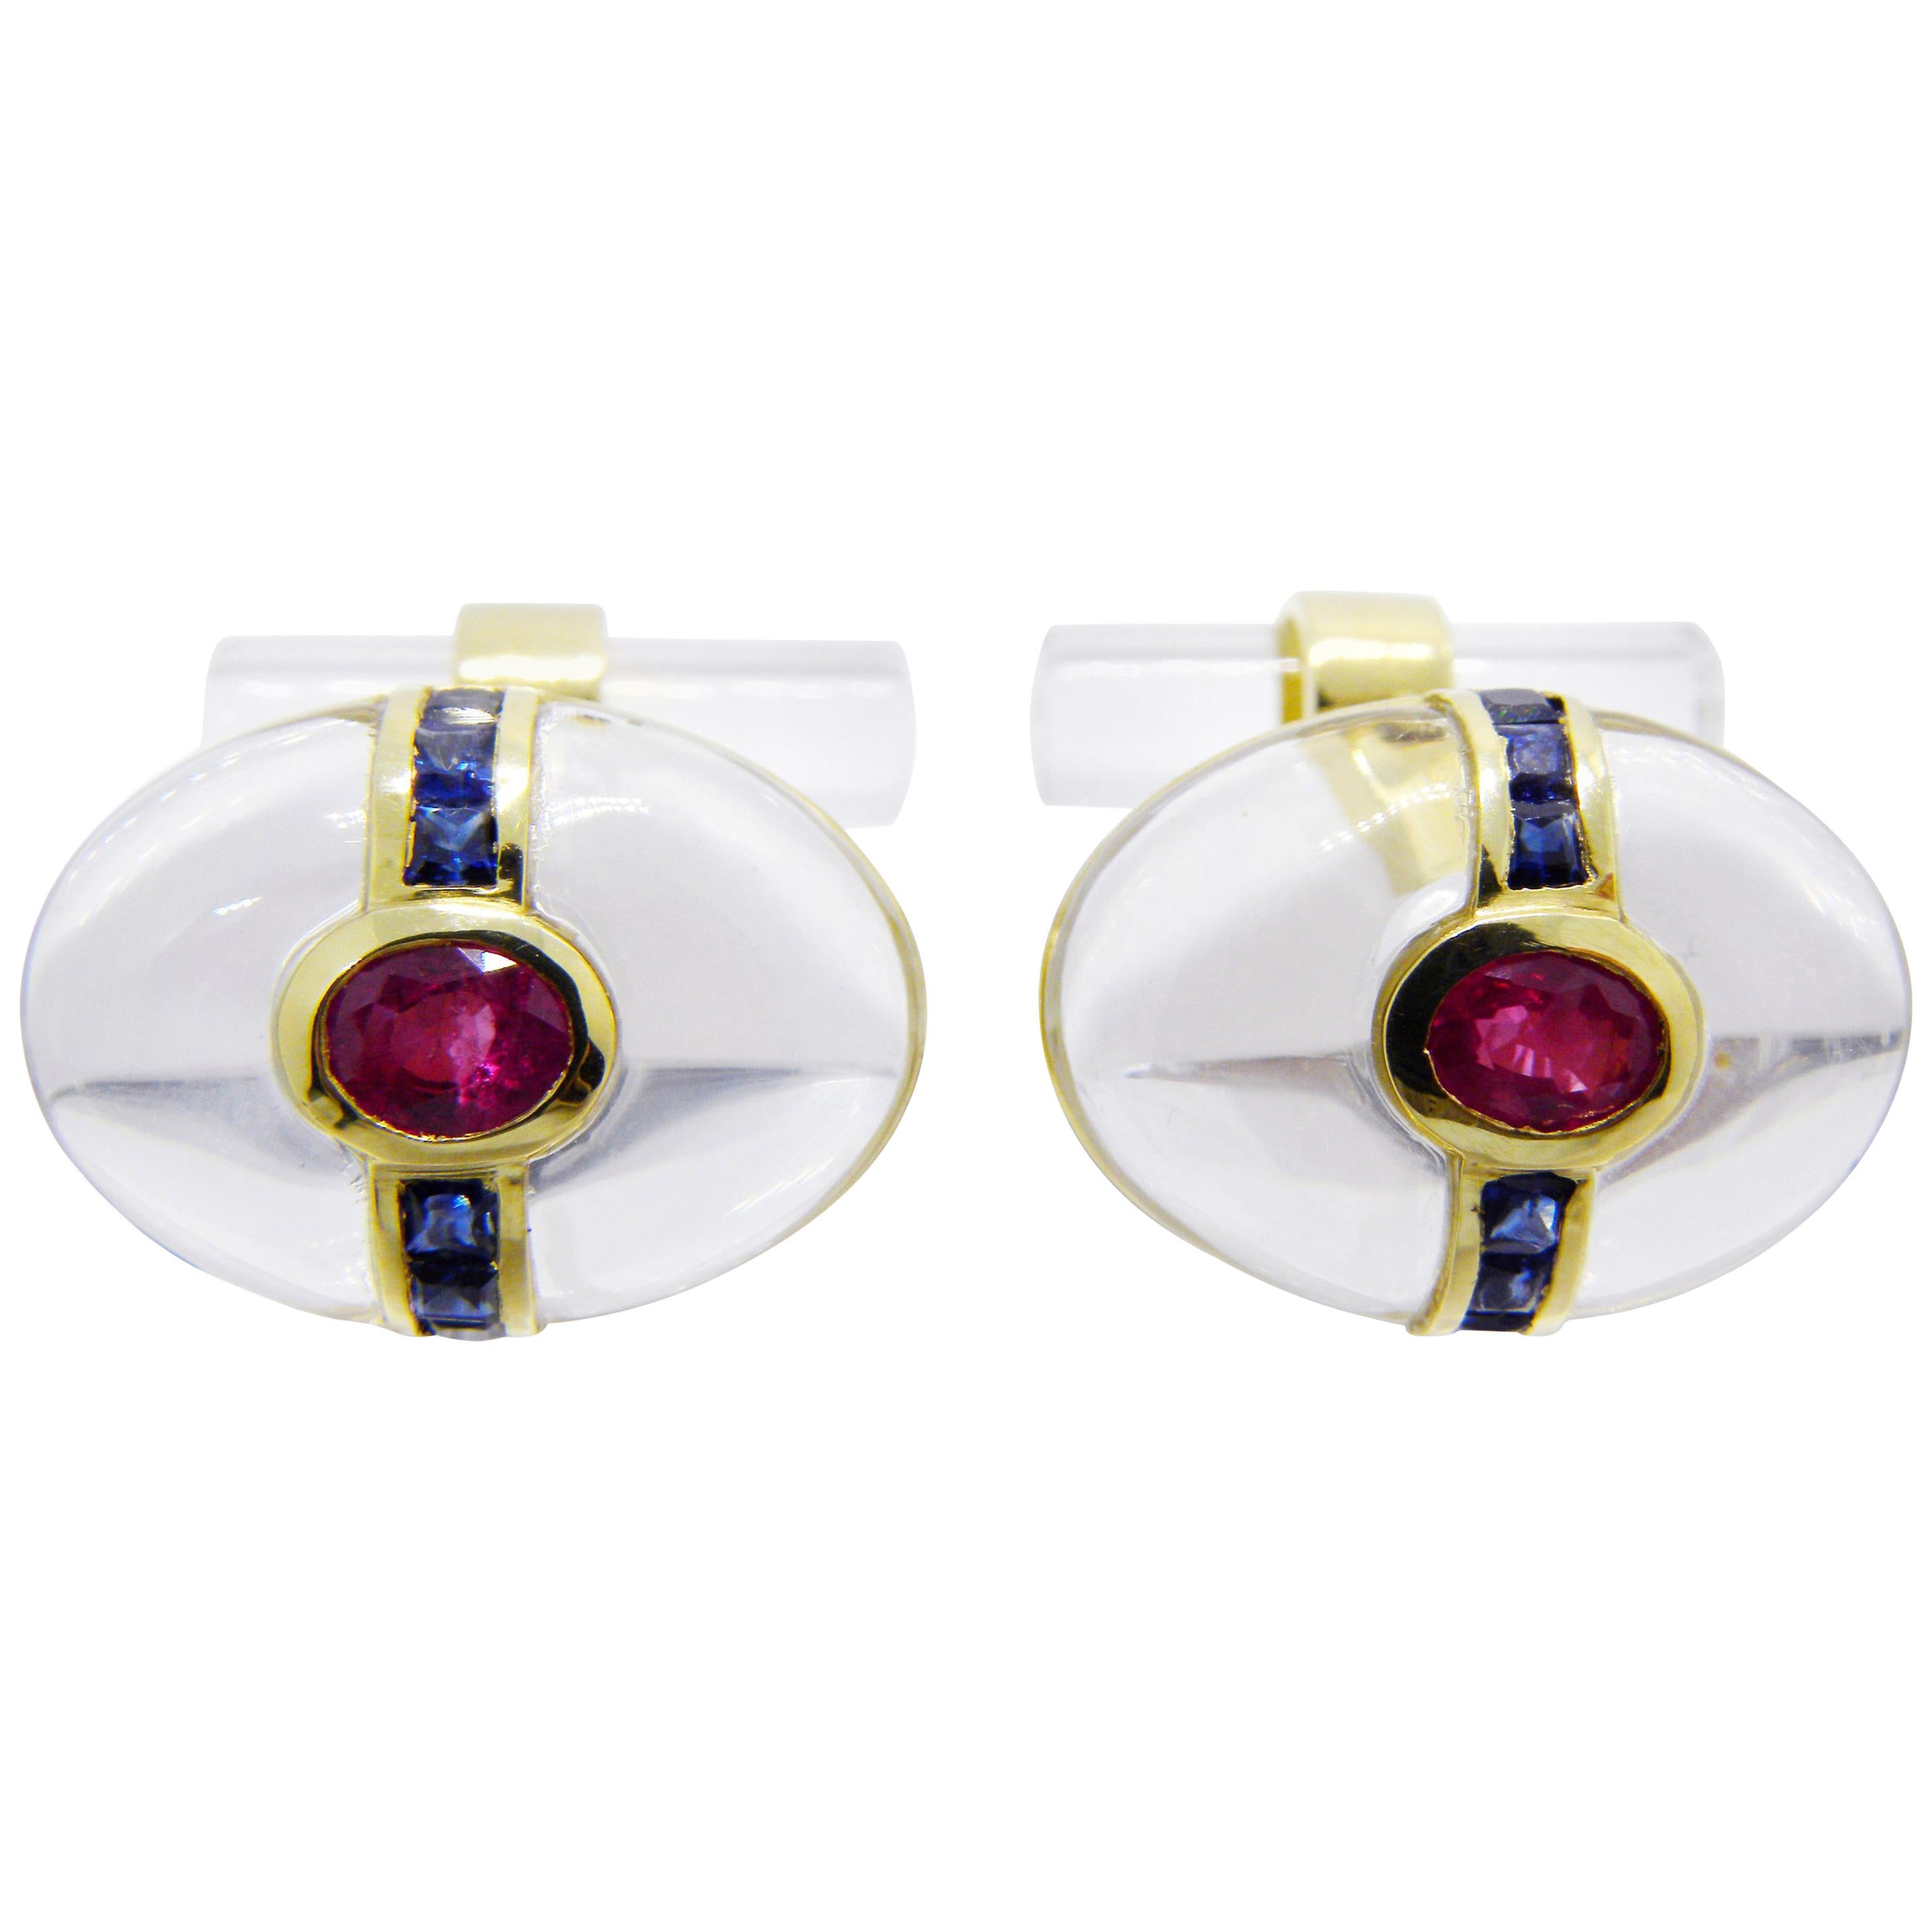 One-of-a-kind, absolutely Chic yet Timeless pair of Cufflinks featuring an Oval Hand Inlaid Transparent Rock Crystal Cabochon embracing a Natural Oval Ruby and an almost One Carat Blue Sapphire Calibré Cut Line in an 18K Yellow Gold Setting. 
A Rock